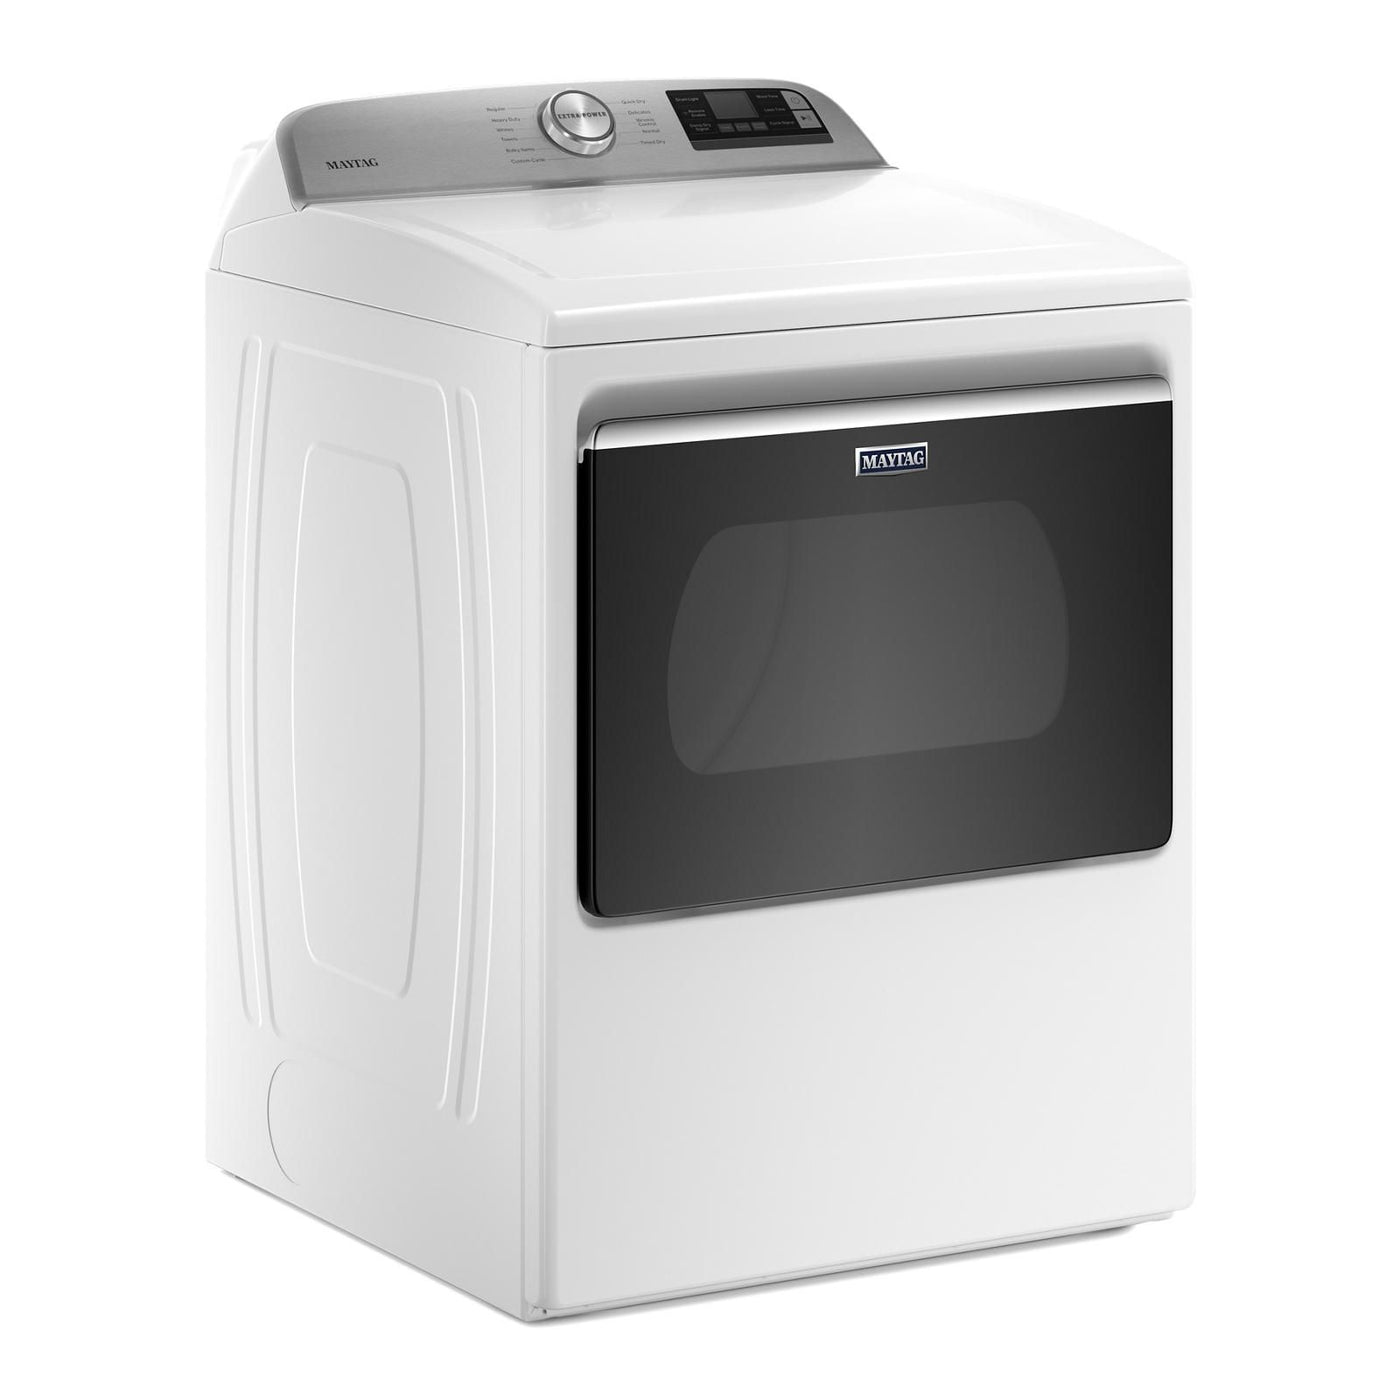 Maytag White Smart Electric Dryer (7.4 Cu.Ft.) - YMED6230HW